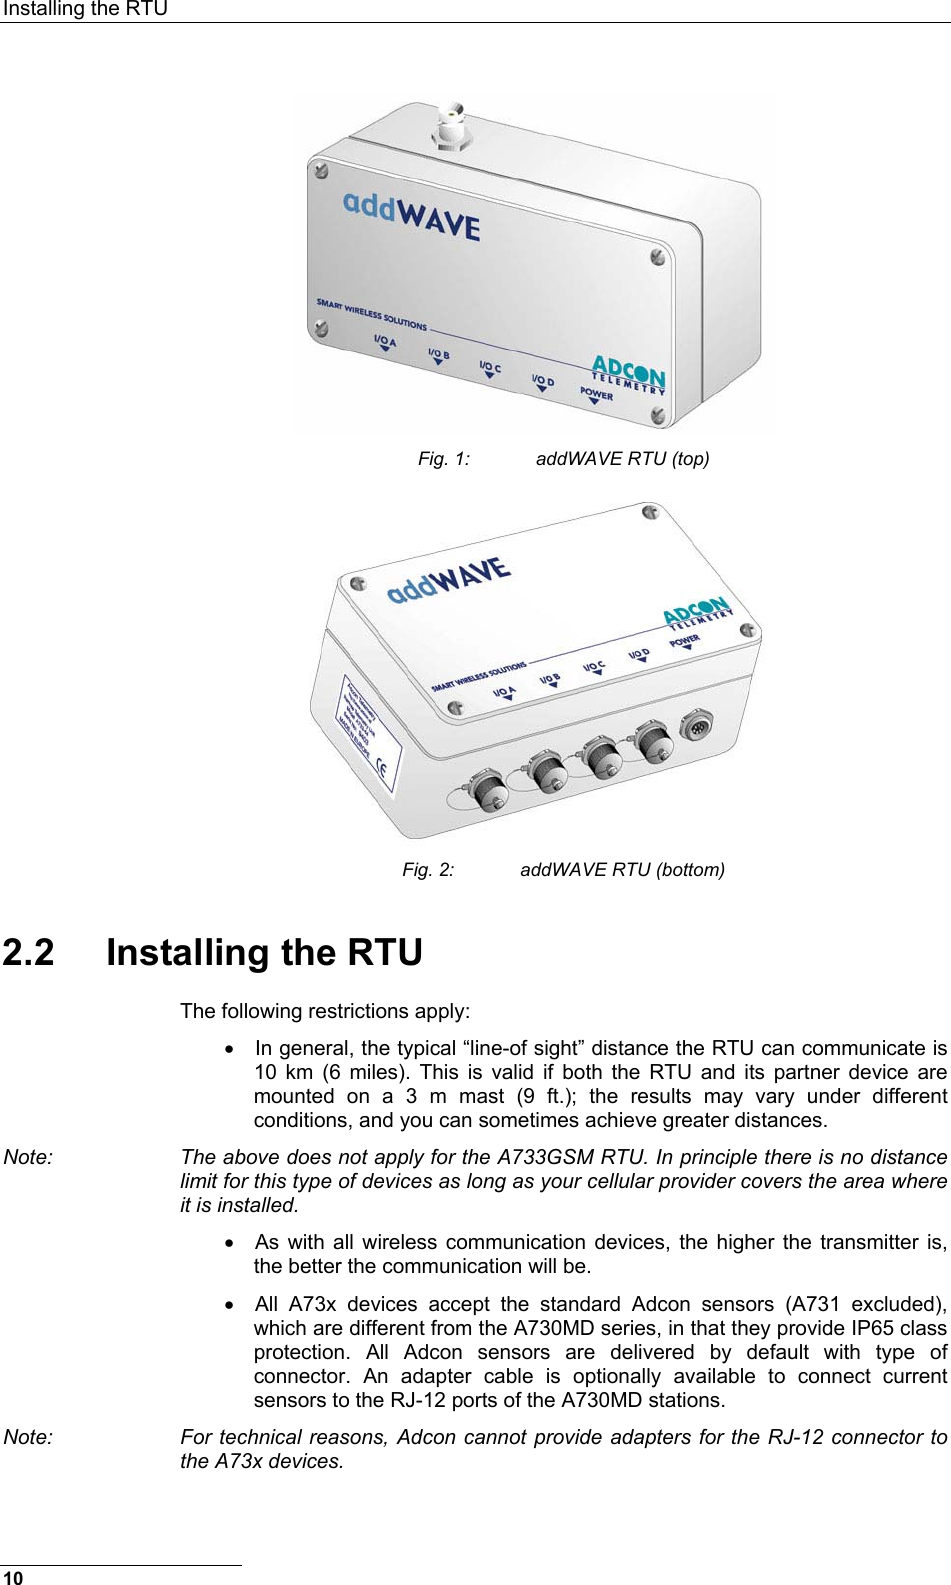 Installing the RTU  10  Fig. 1:  addWAVE RTU (top)  Fig. 2:  addWAVE RTU (bottom) 2.2 Installing the RTU The following restrictions apply: •  In general, the typical “line-of sight” distance the RTU can communicate is 10 km (6 miles). This is valid if both the RTU and its partner device are mounted on a 3 m mast (9 ft.); the results may vary under different conditions, and you can sometimes achieve greater distances. Note:  The above does not apply for the A733GSM RTU. In principle there is no distance limit for this type of devices as long as your cellular provider covers the area where it is installed. •  As with all wireless communication devices, the higher the transmitter is, the better the communication will be. •  All A73x devices accept the standard Adcon sensors (A731 excluded), which are different from the A730MD series, in that they provide IP65 class protection. All Adcon sensors are delivered by default with type of connector. An adapter cable is optionally available to connect current sensors to the RJ-12 ports of the A730MD stations. Note:  For technical reasons, Adcon cannot provide adapters for the RJ-12 connector to the A73x devices. 